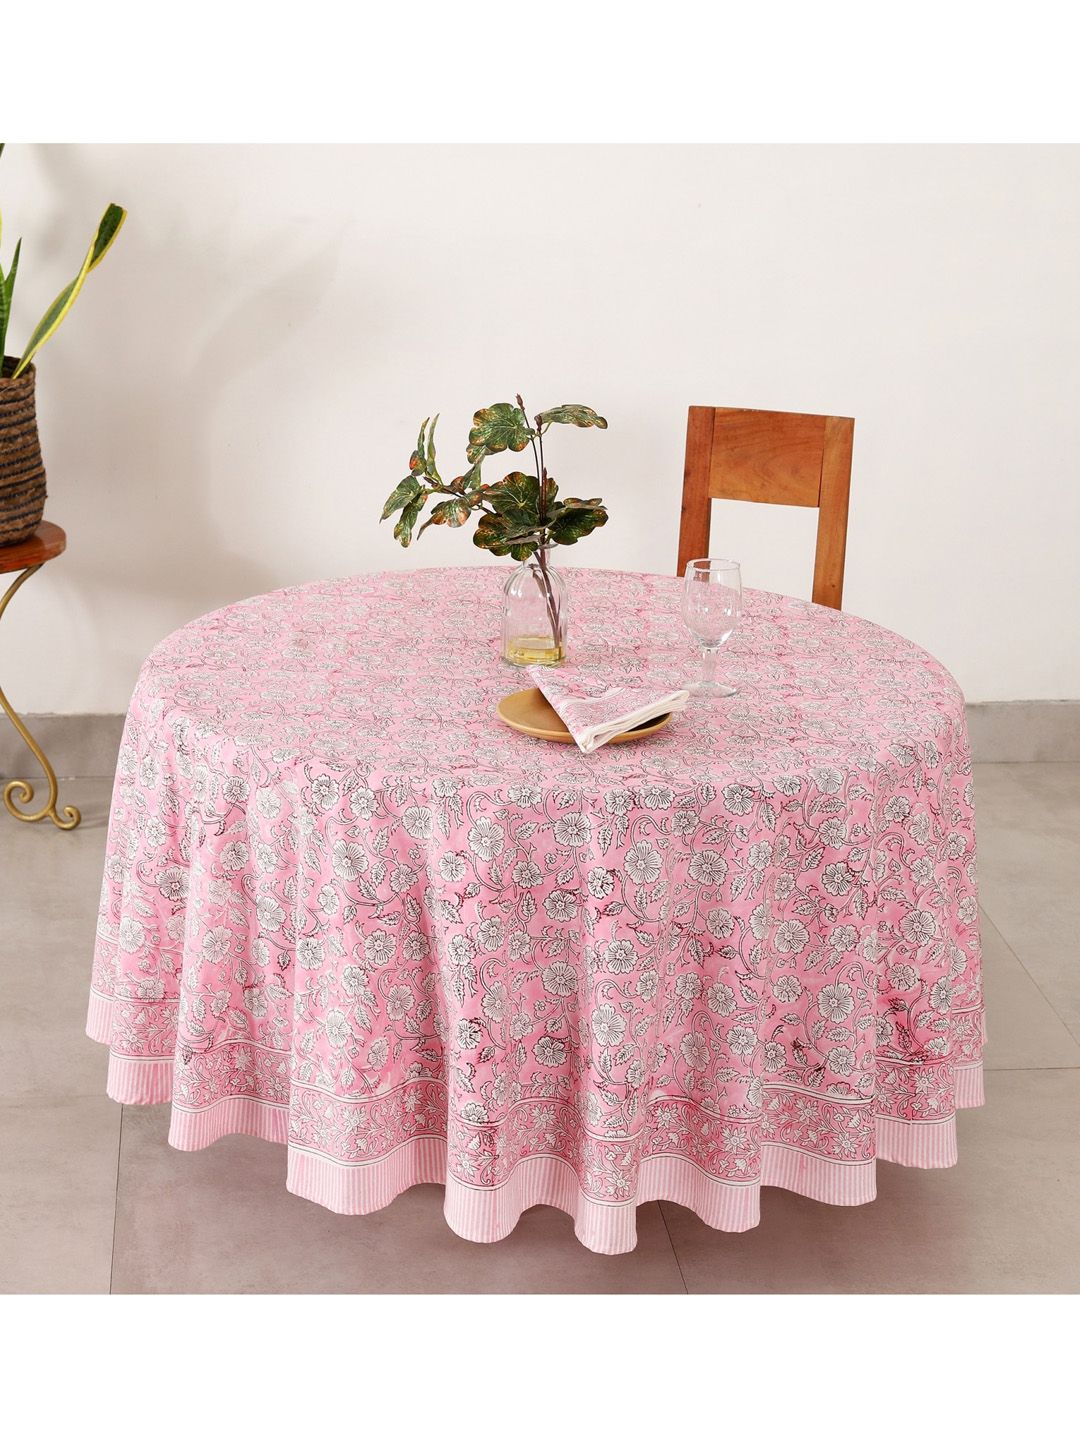 HANDICRAFT PALACE Pink & White Floral Hand Block Printed Round Table Cover With 4 Napkins Price in India